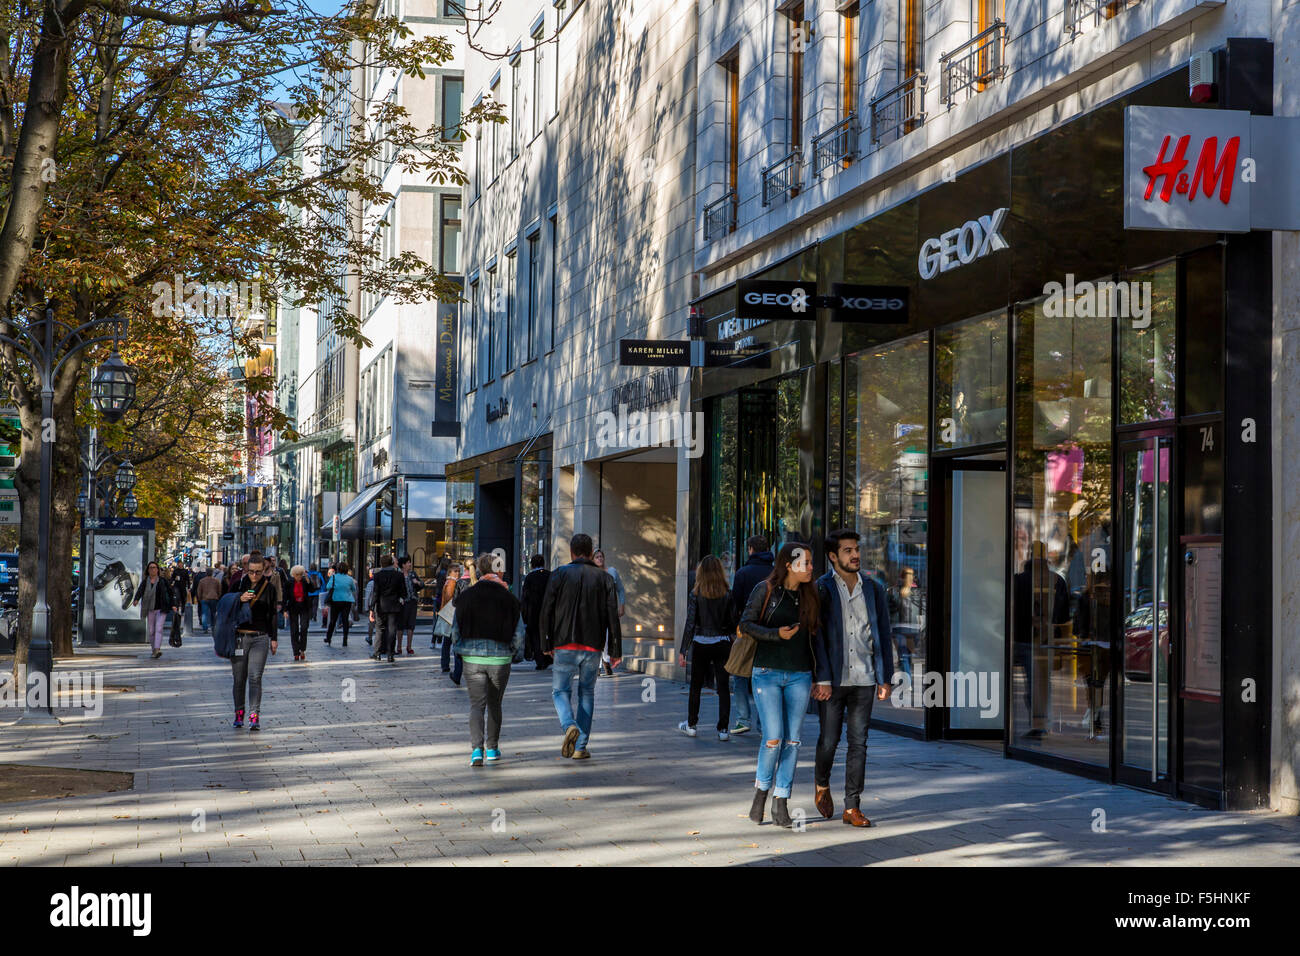 Königsallee, called Kö, noble central shopping street with many expensive brand stores and shops, Germany Photo - Alamy